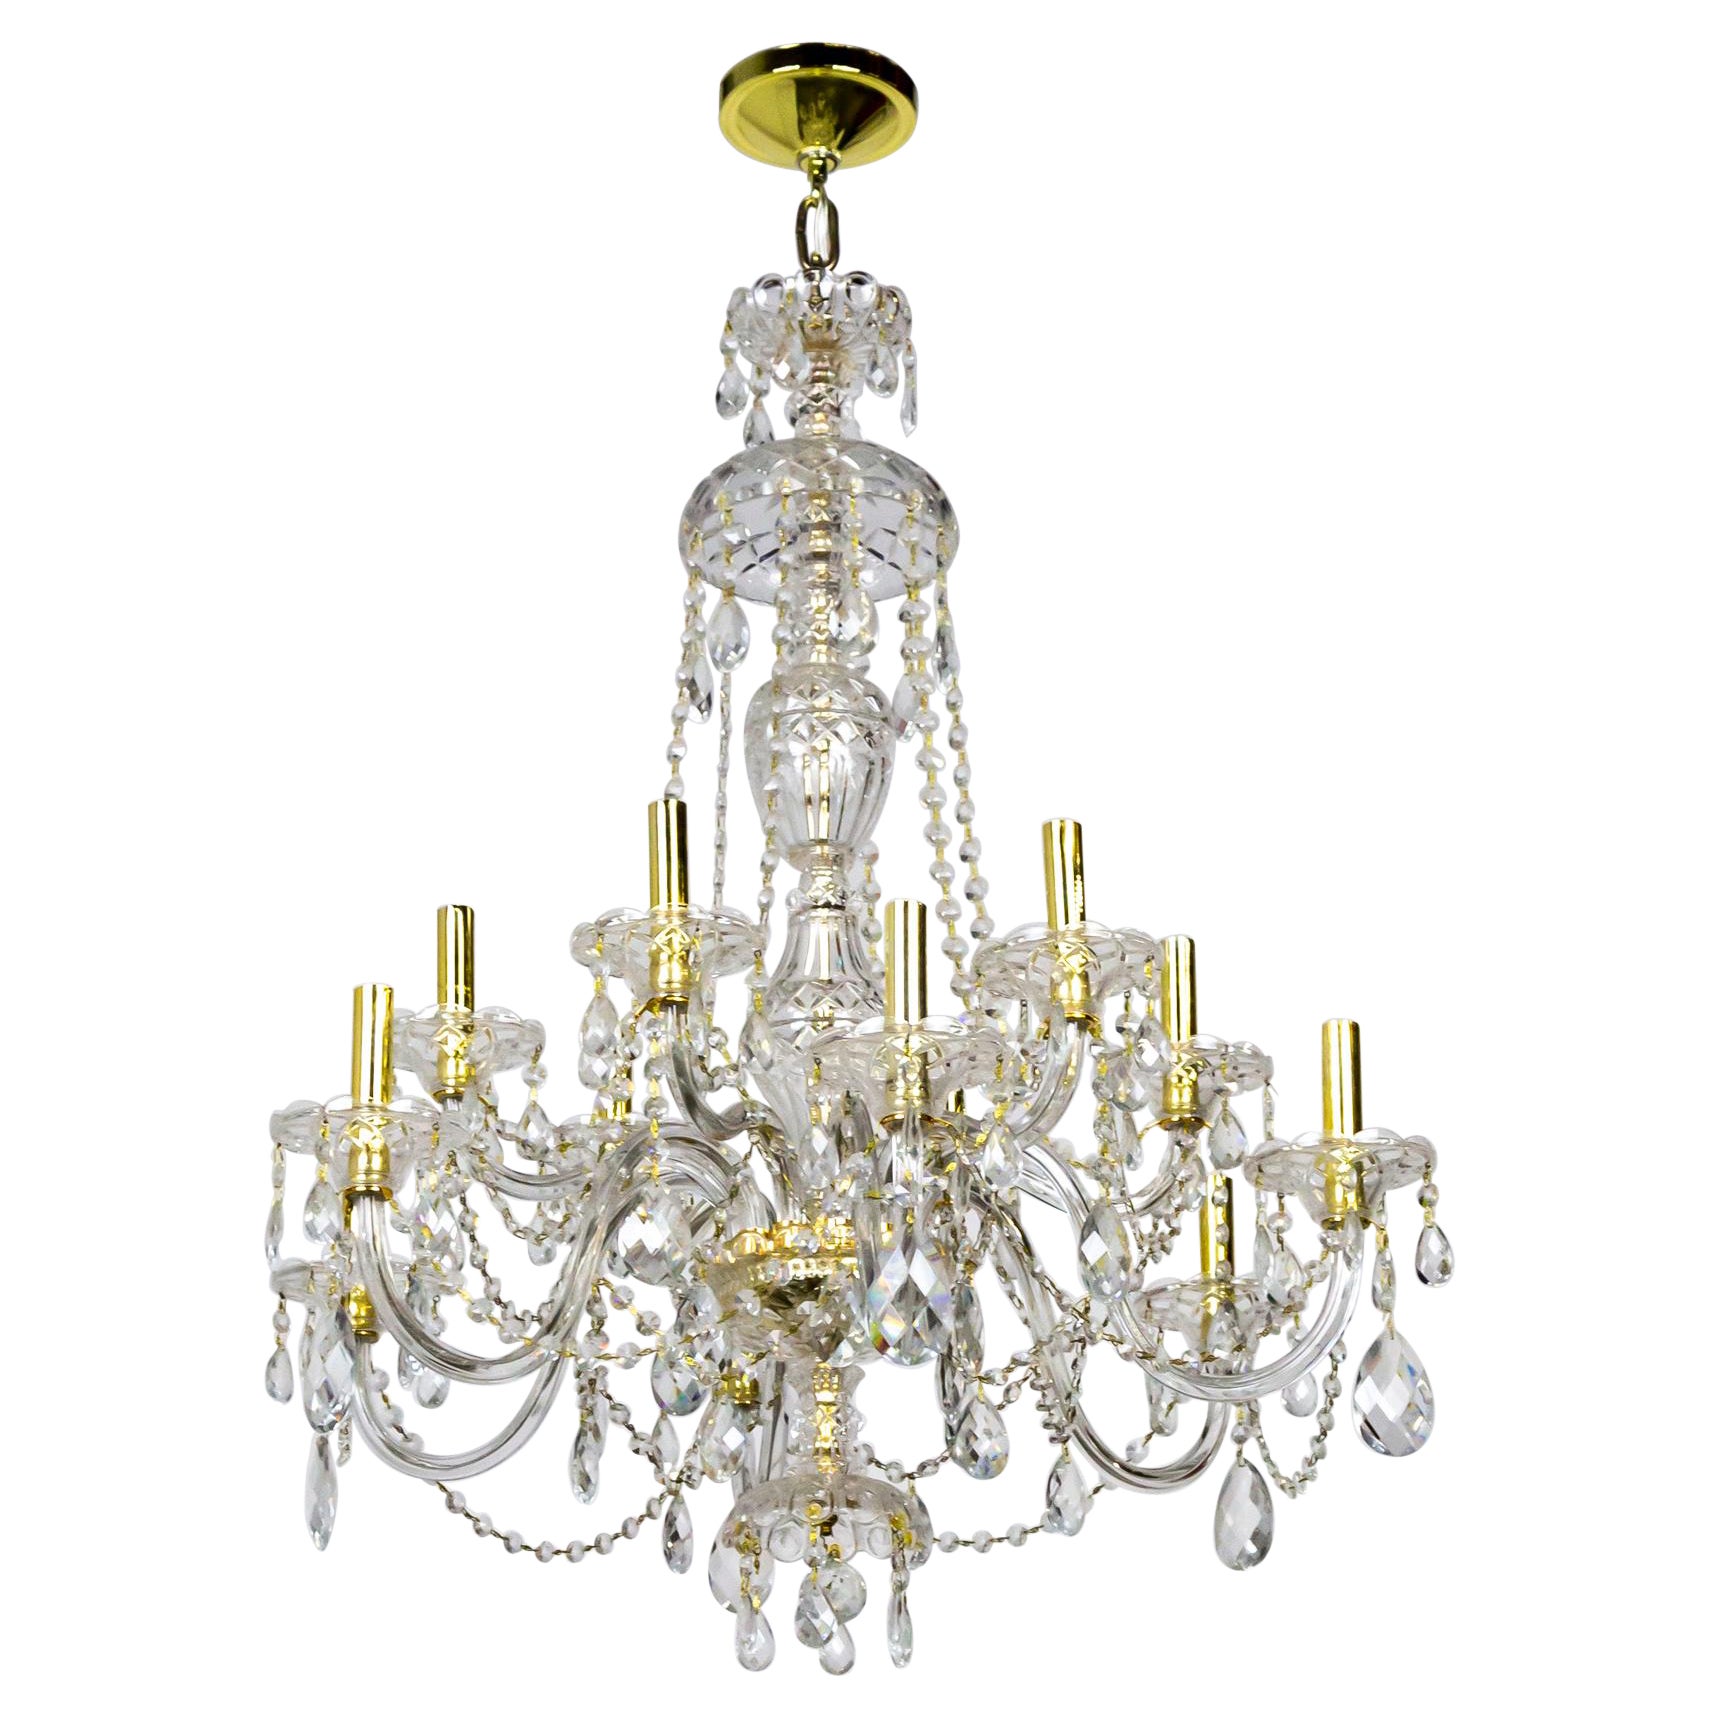 12-Light 2-Tier Bohemian Glass Chandelier w/ Gold Tone Candle Covers For Sale